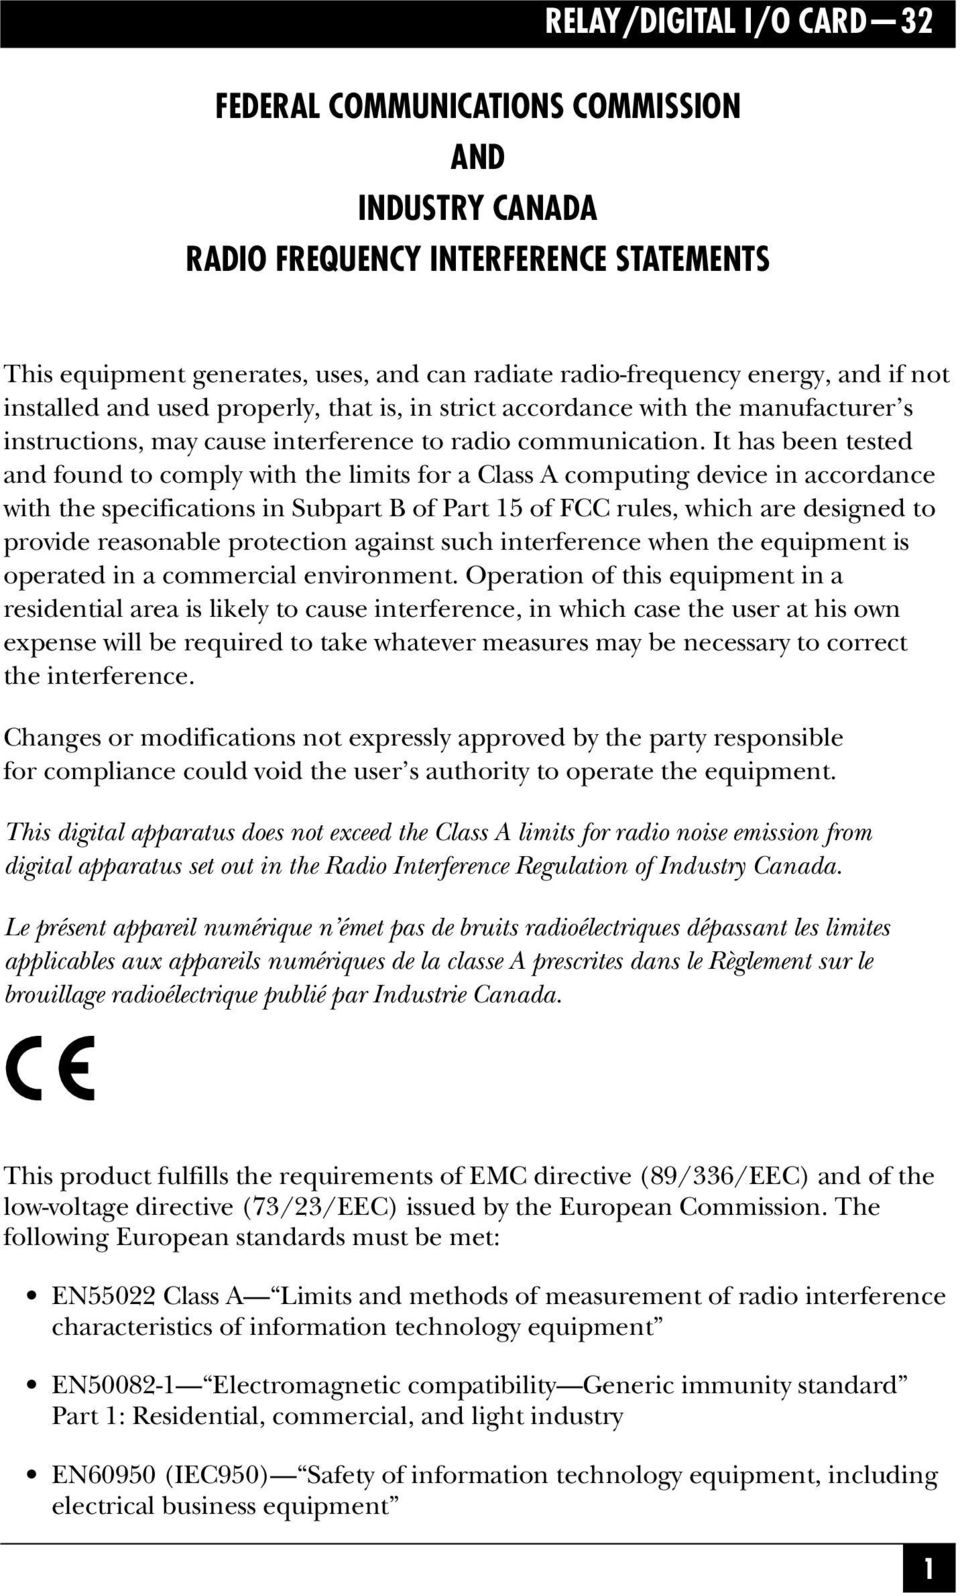 It has been tested and found to comply with the limits for a Class A computing device in accordance with the specifications in Subpart B of Part 15 of FCC rules, which are designed to provide